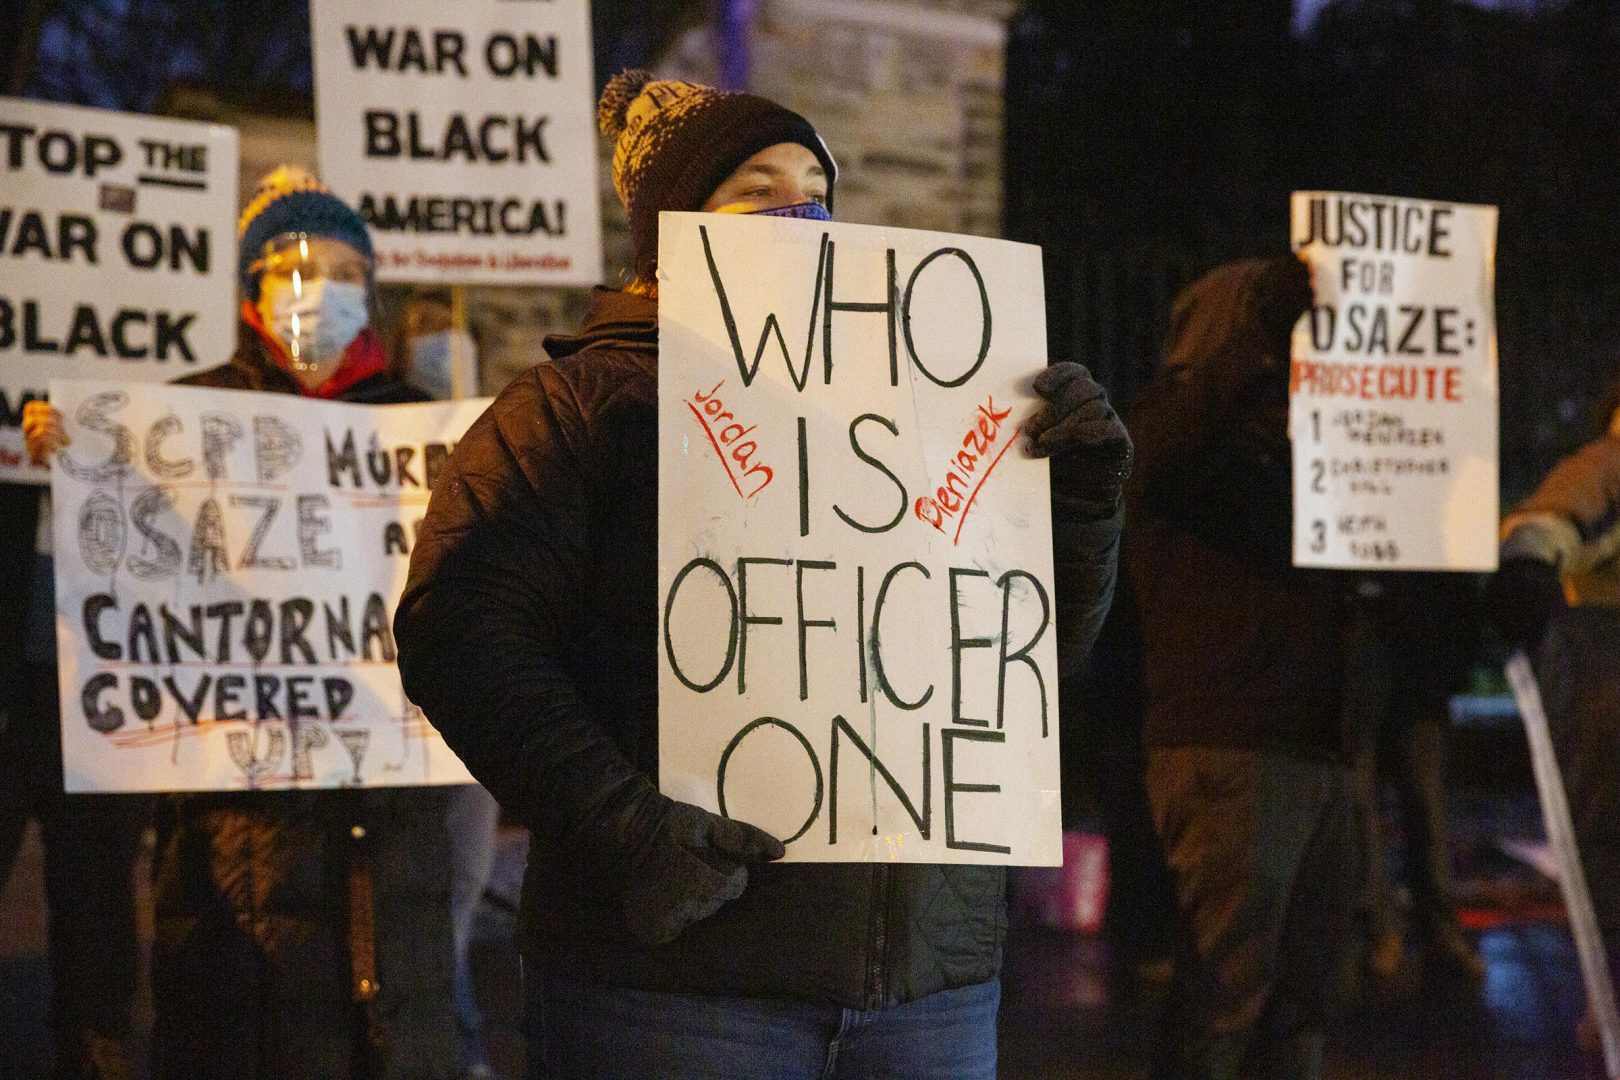 Protesters gathered in downtown State College Tuesday night to renew calls to remove three borough police officers involved in the killing of Osaze Osagie.